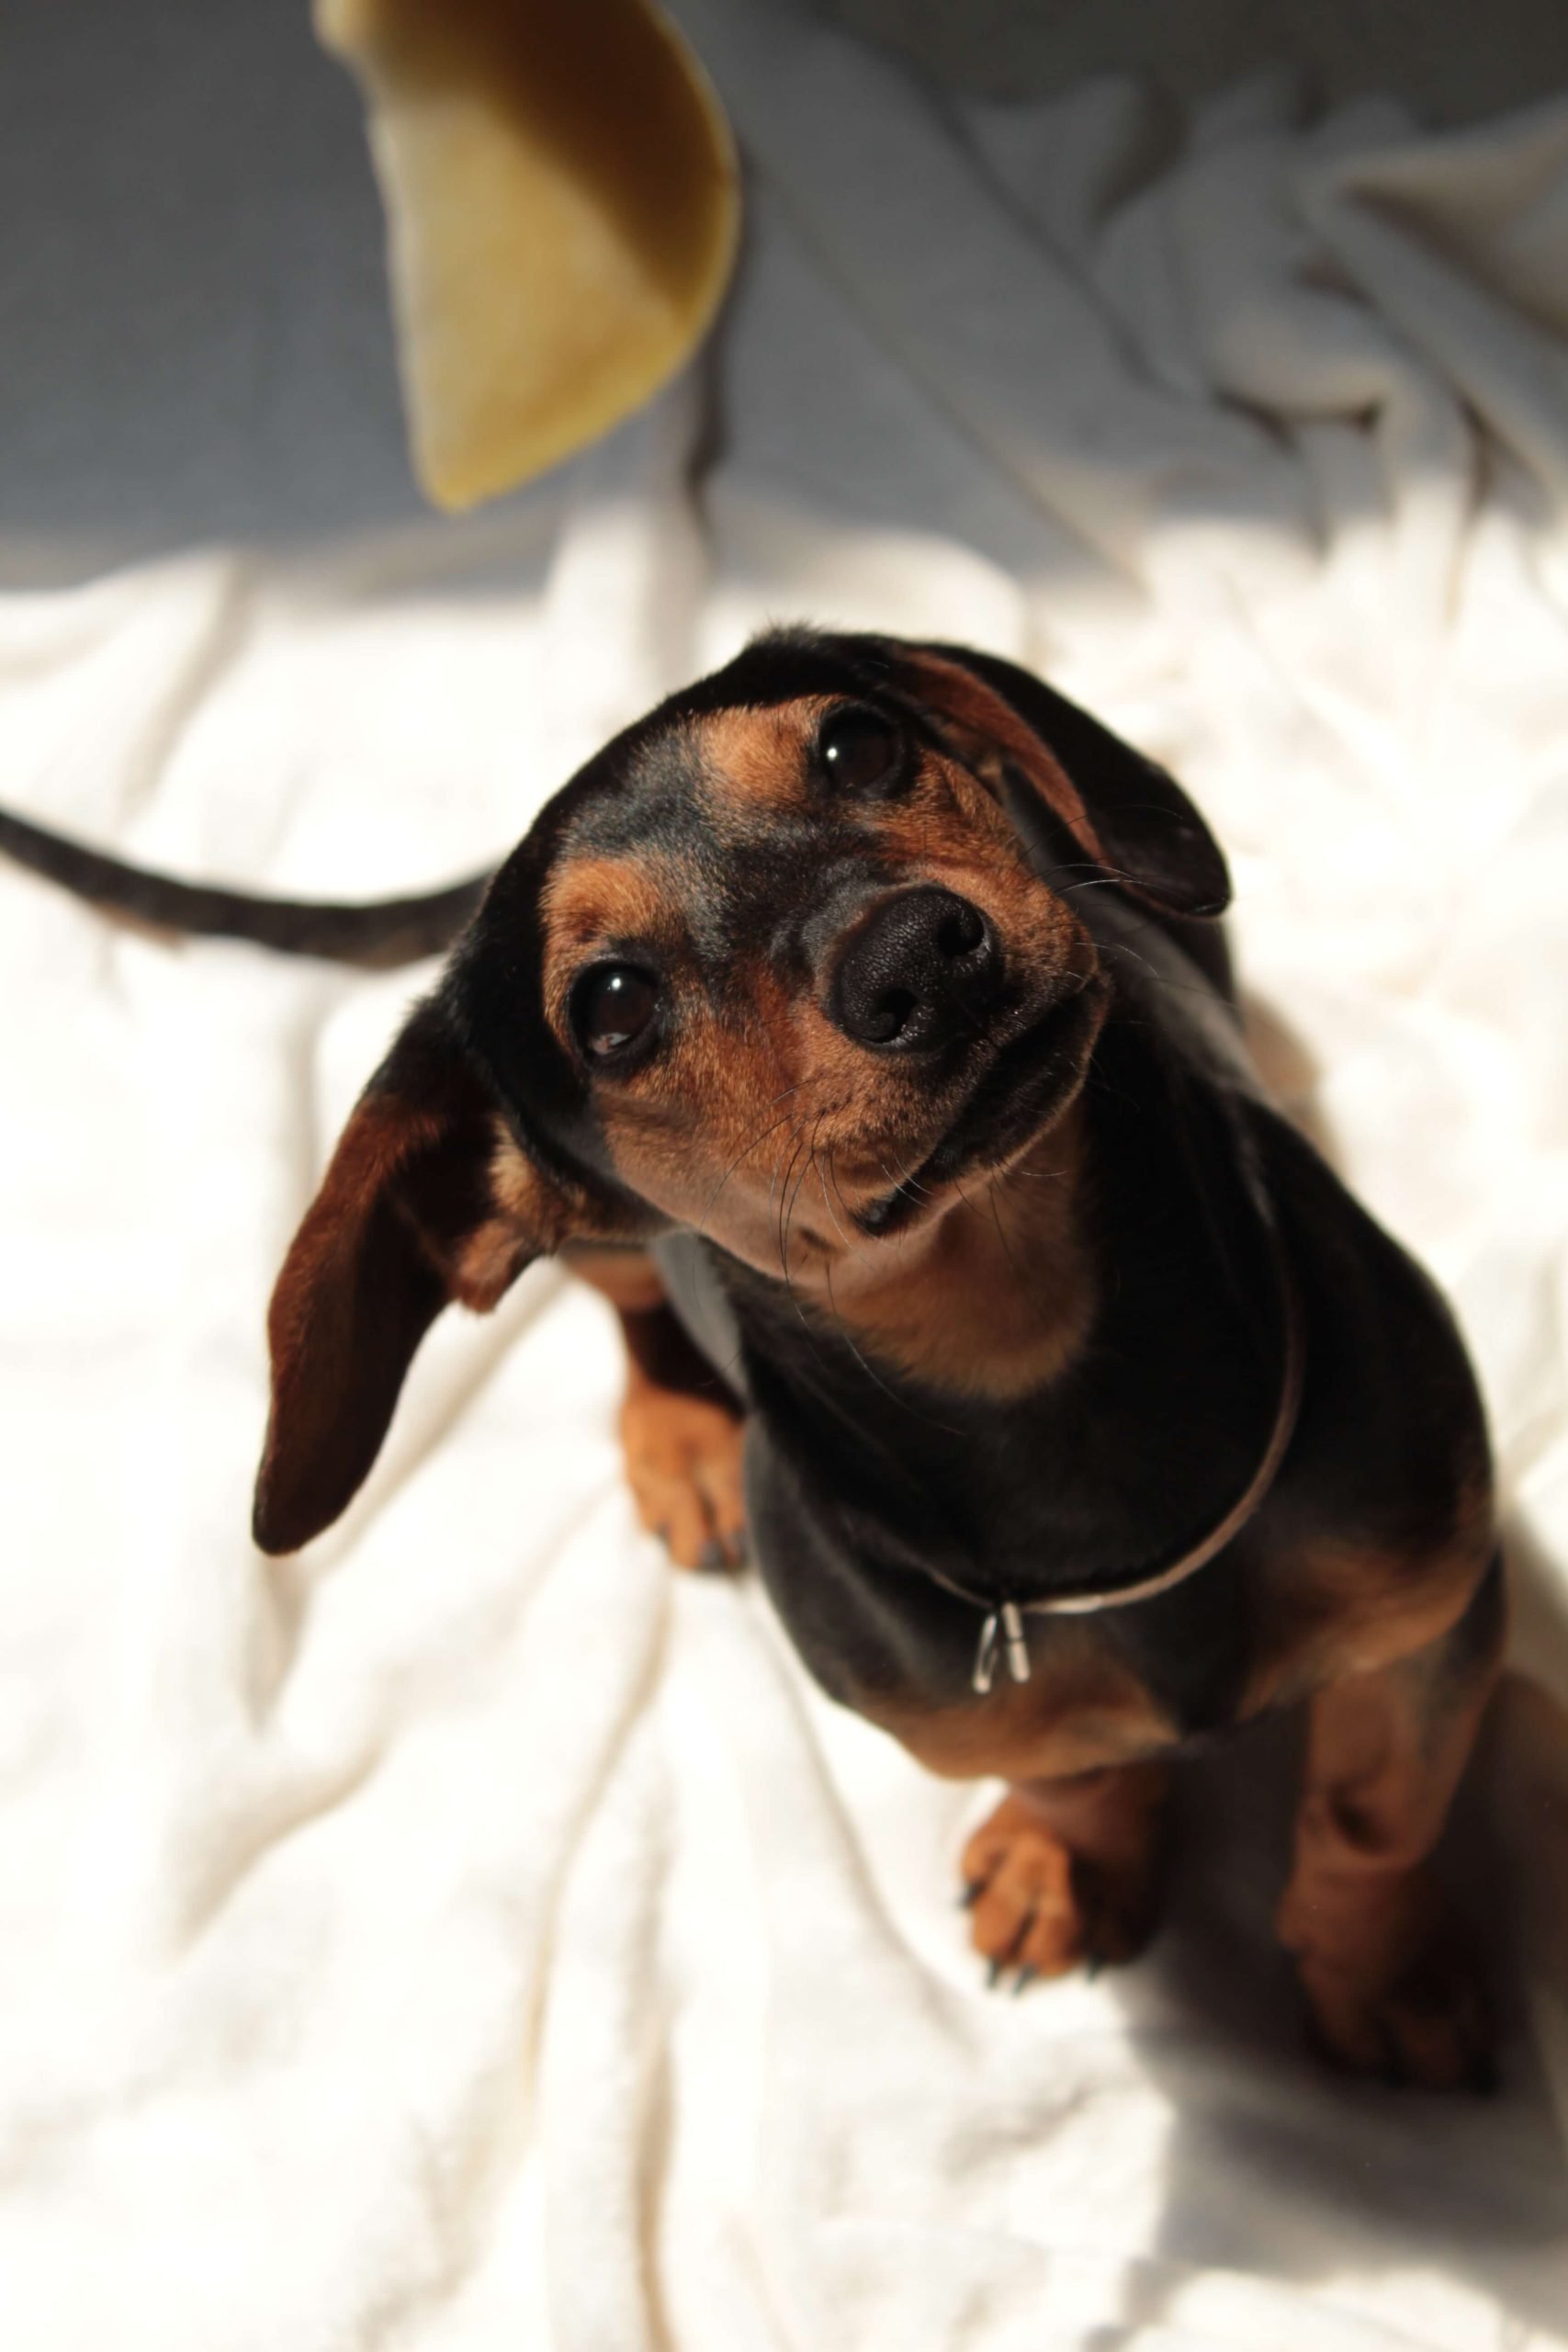 What are the symptoms of dachshund stomach issues?